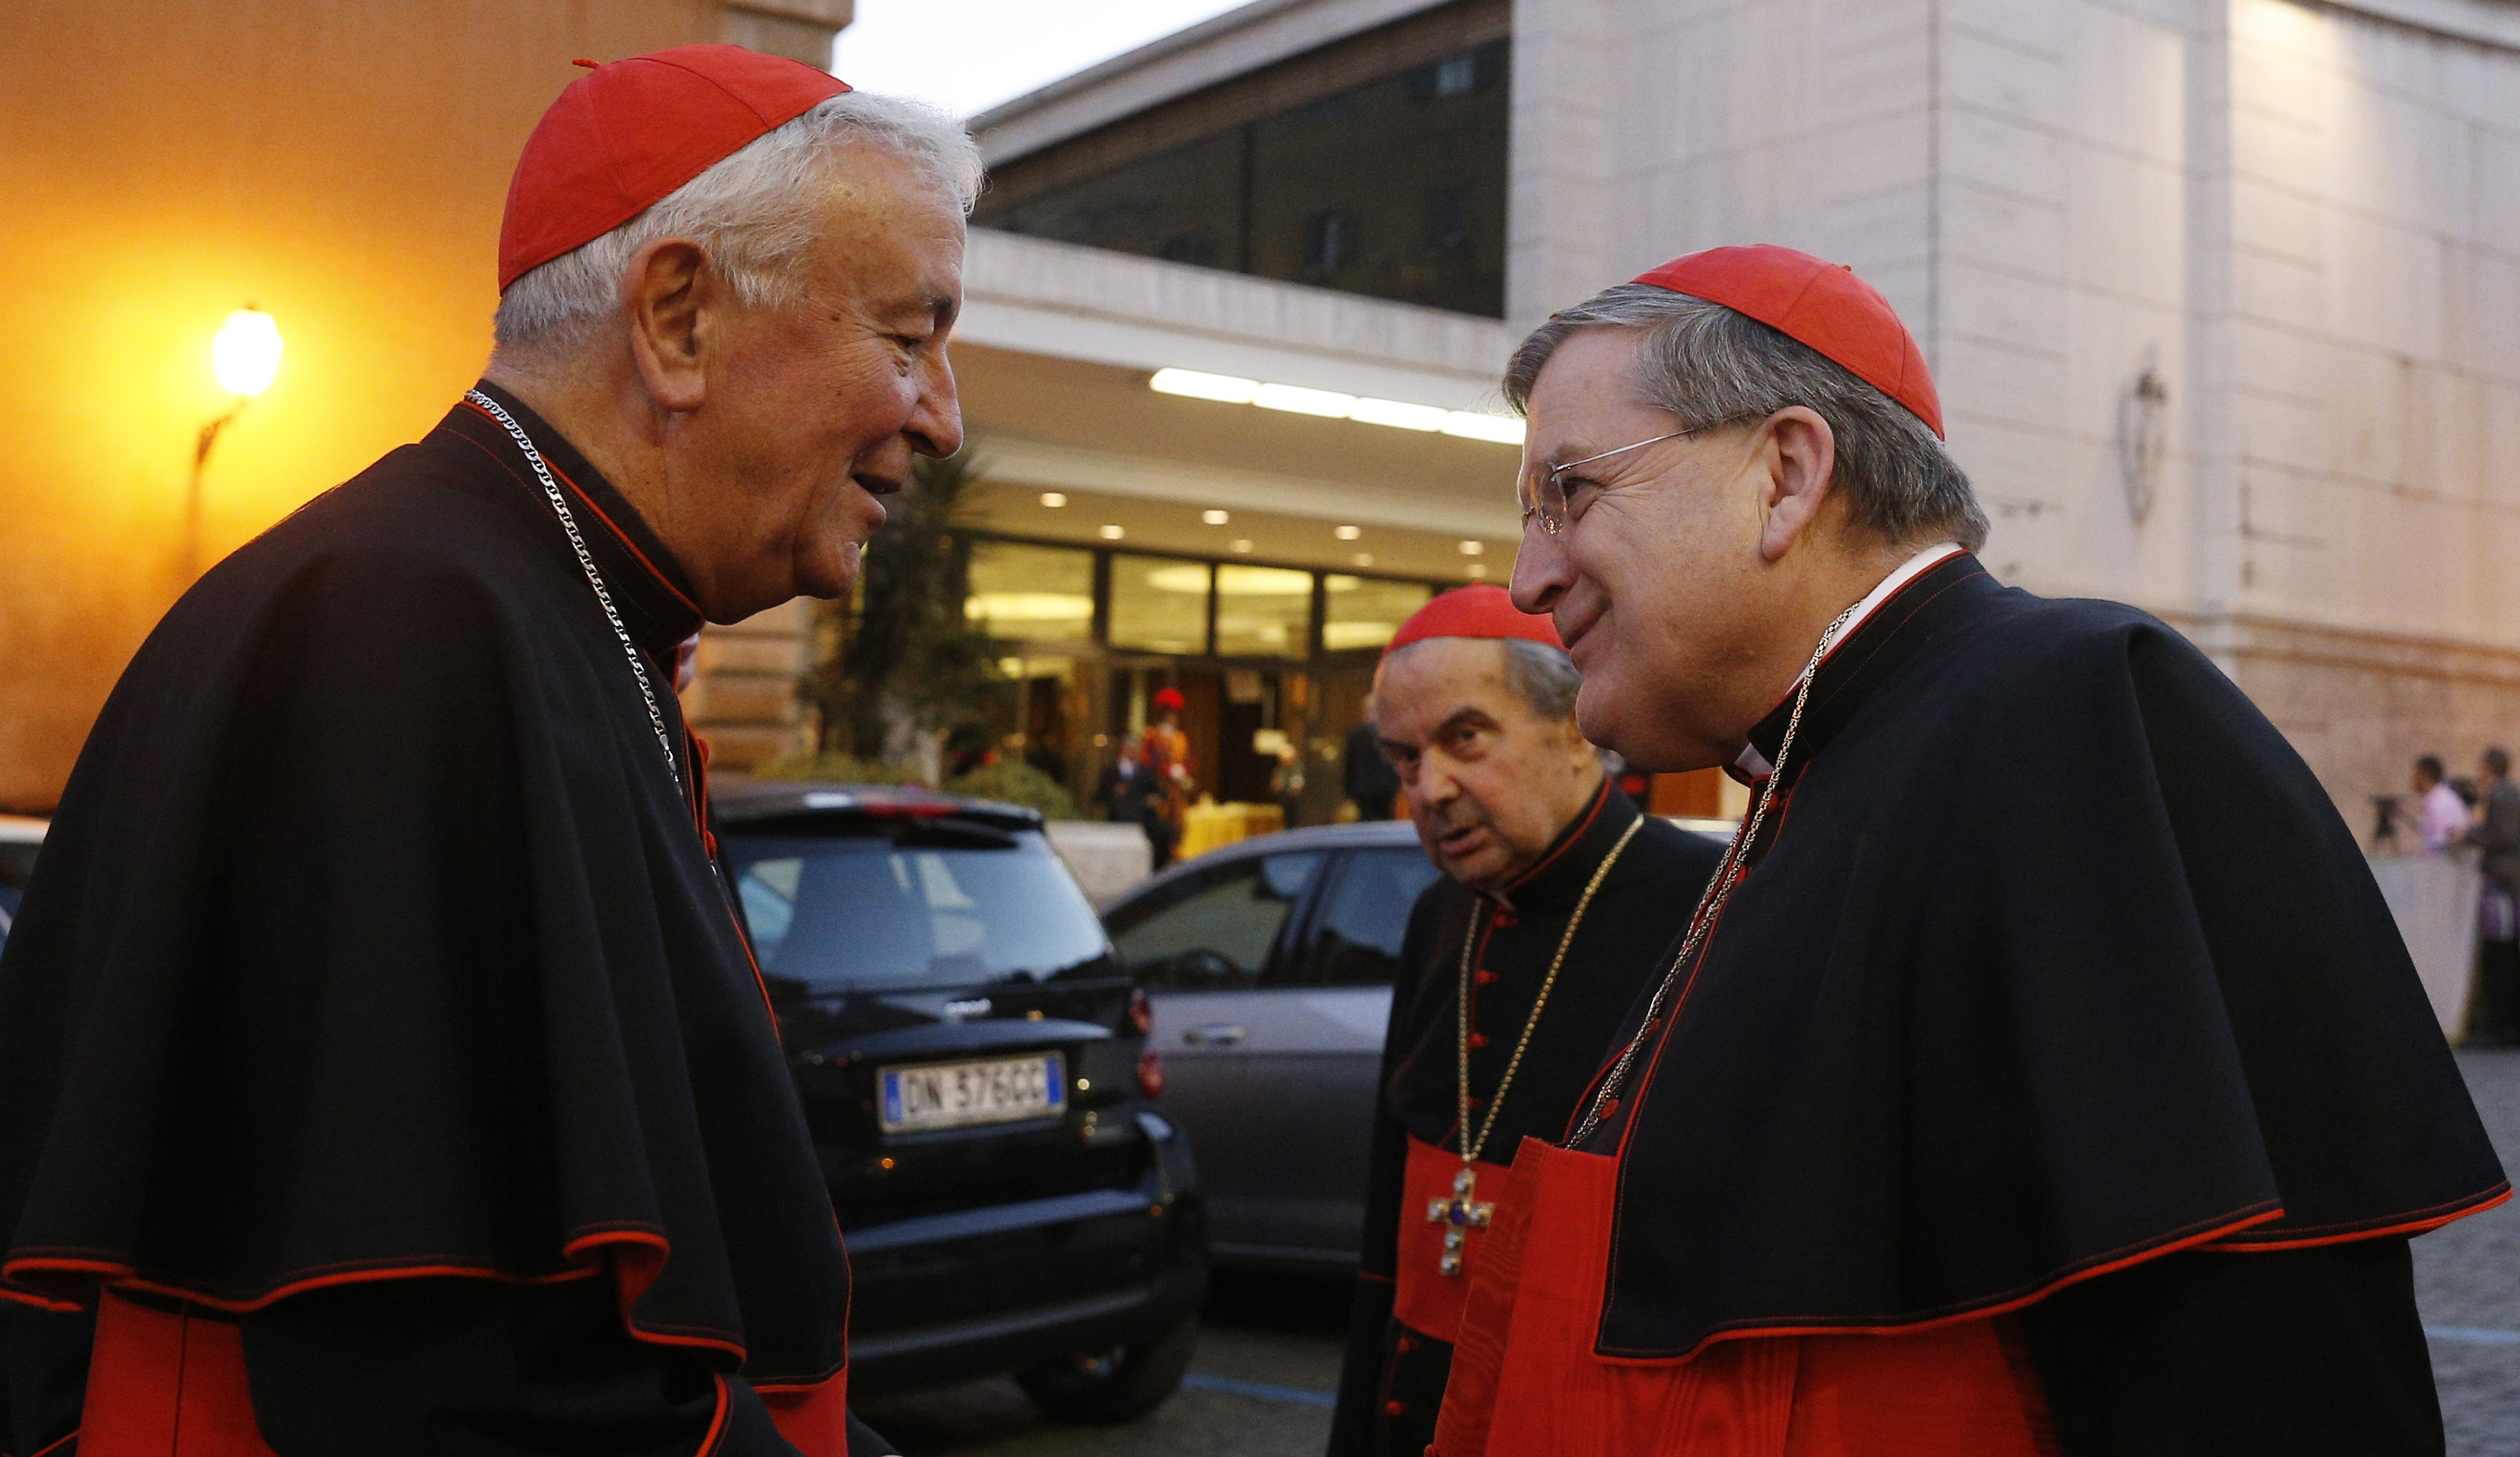 Cardinal Vincent Nichols, left, Cardinal Carlo Caffarra, center, and Cardinal Raymond Burke, in a 2014 file photo. Burke and Caffarra were two of four cardinals that publicly questioned Pope Francis' teachings on family life in a letter published Nov. 14. (CNS/Paul Haring)